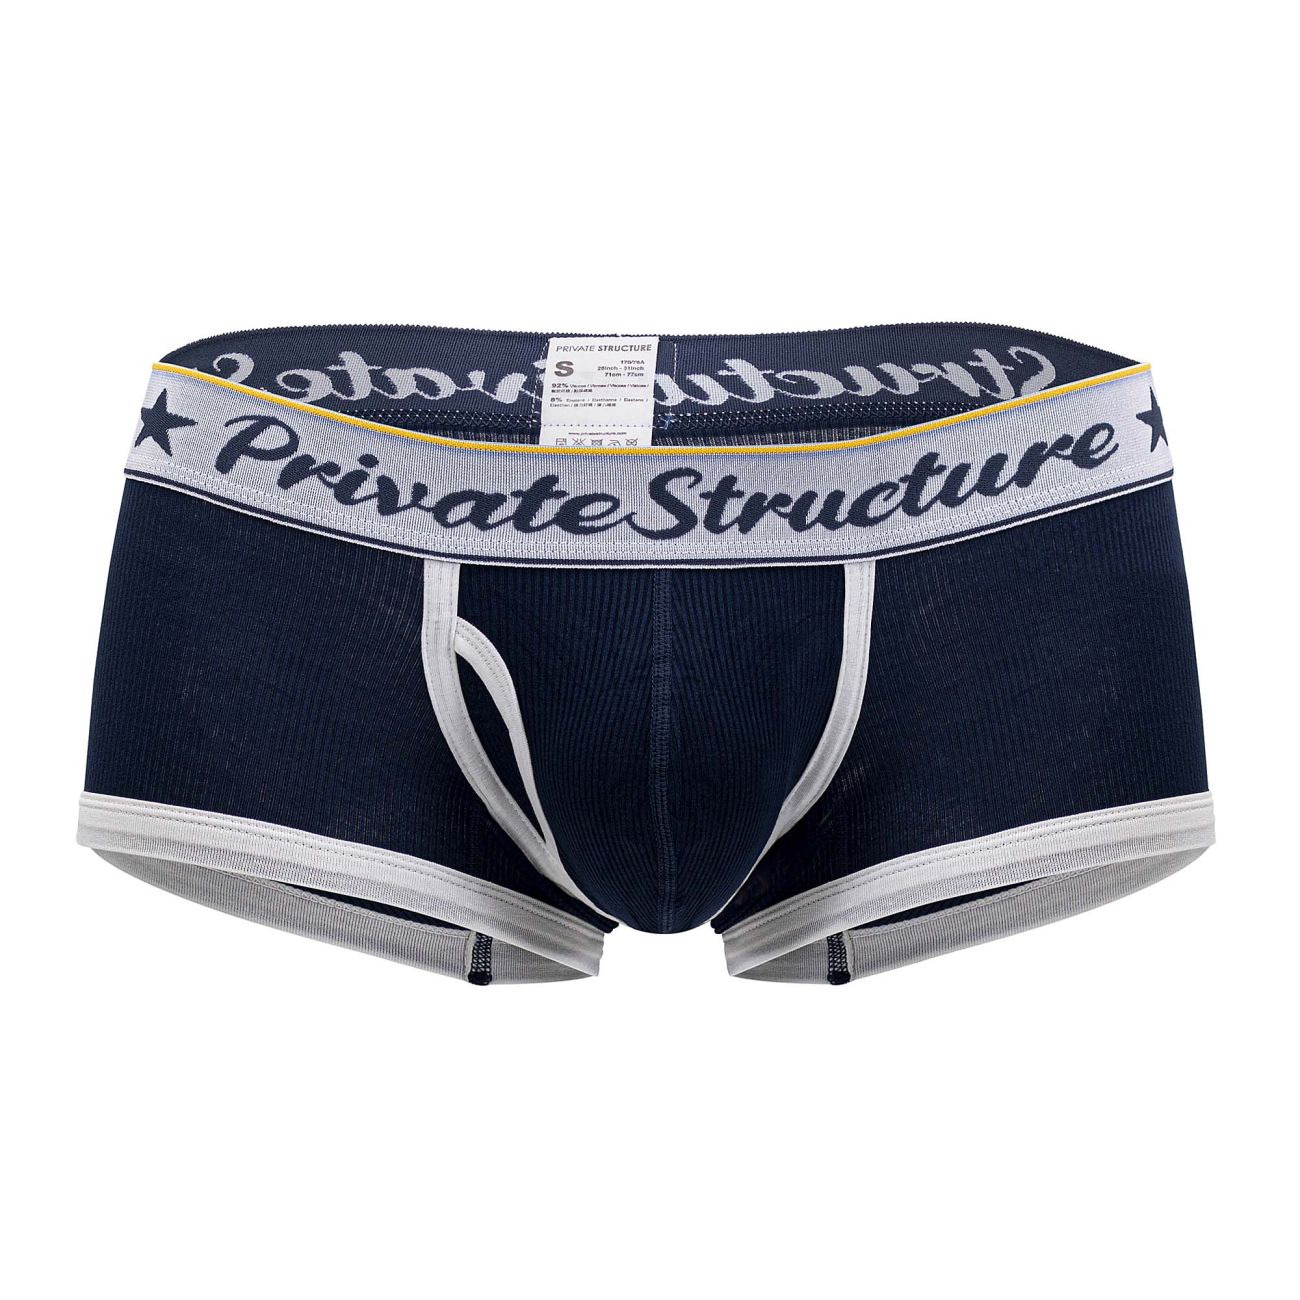 Private Structure Classic Mid Waist Trunks